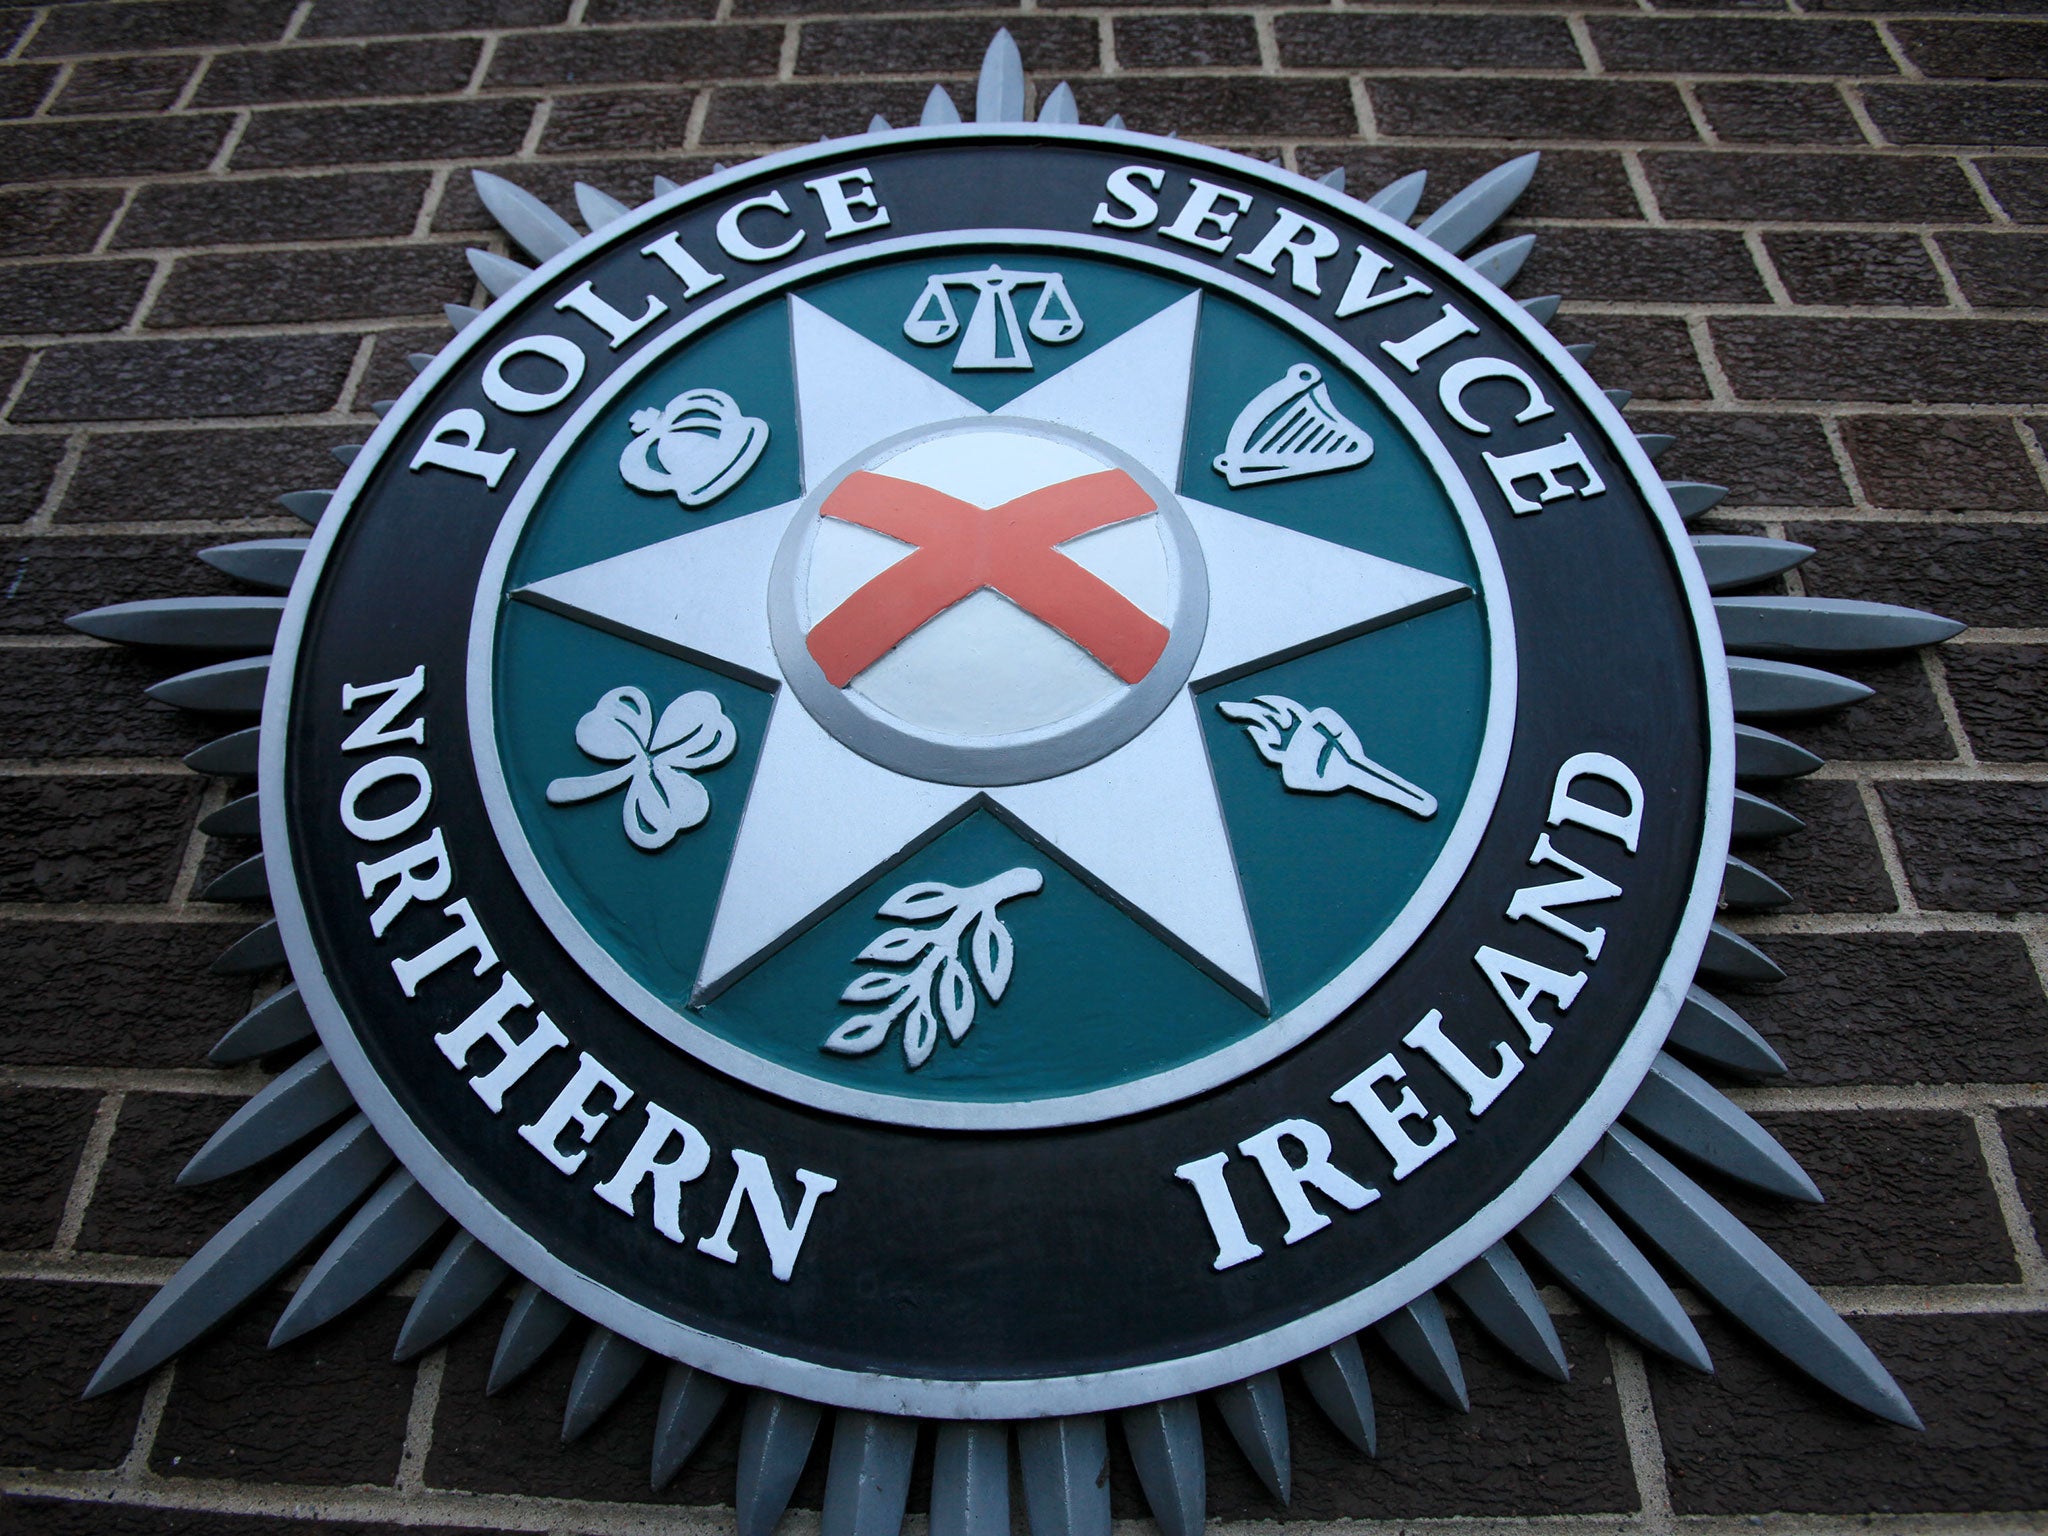 Police were called to County Down over an exploded device today